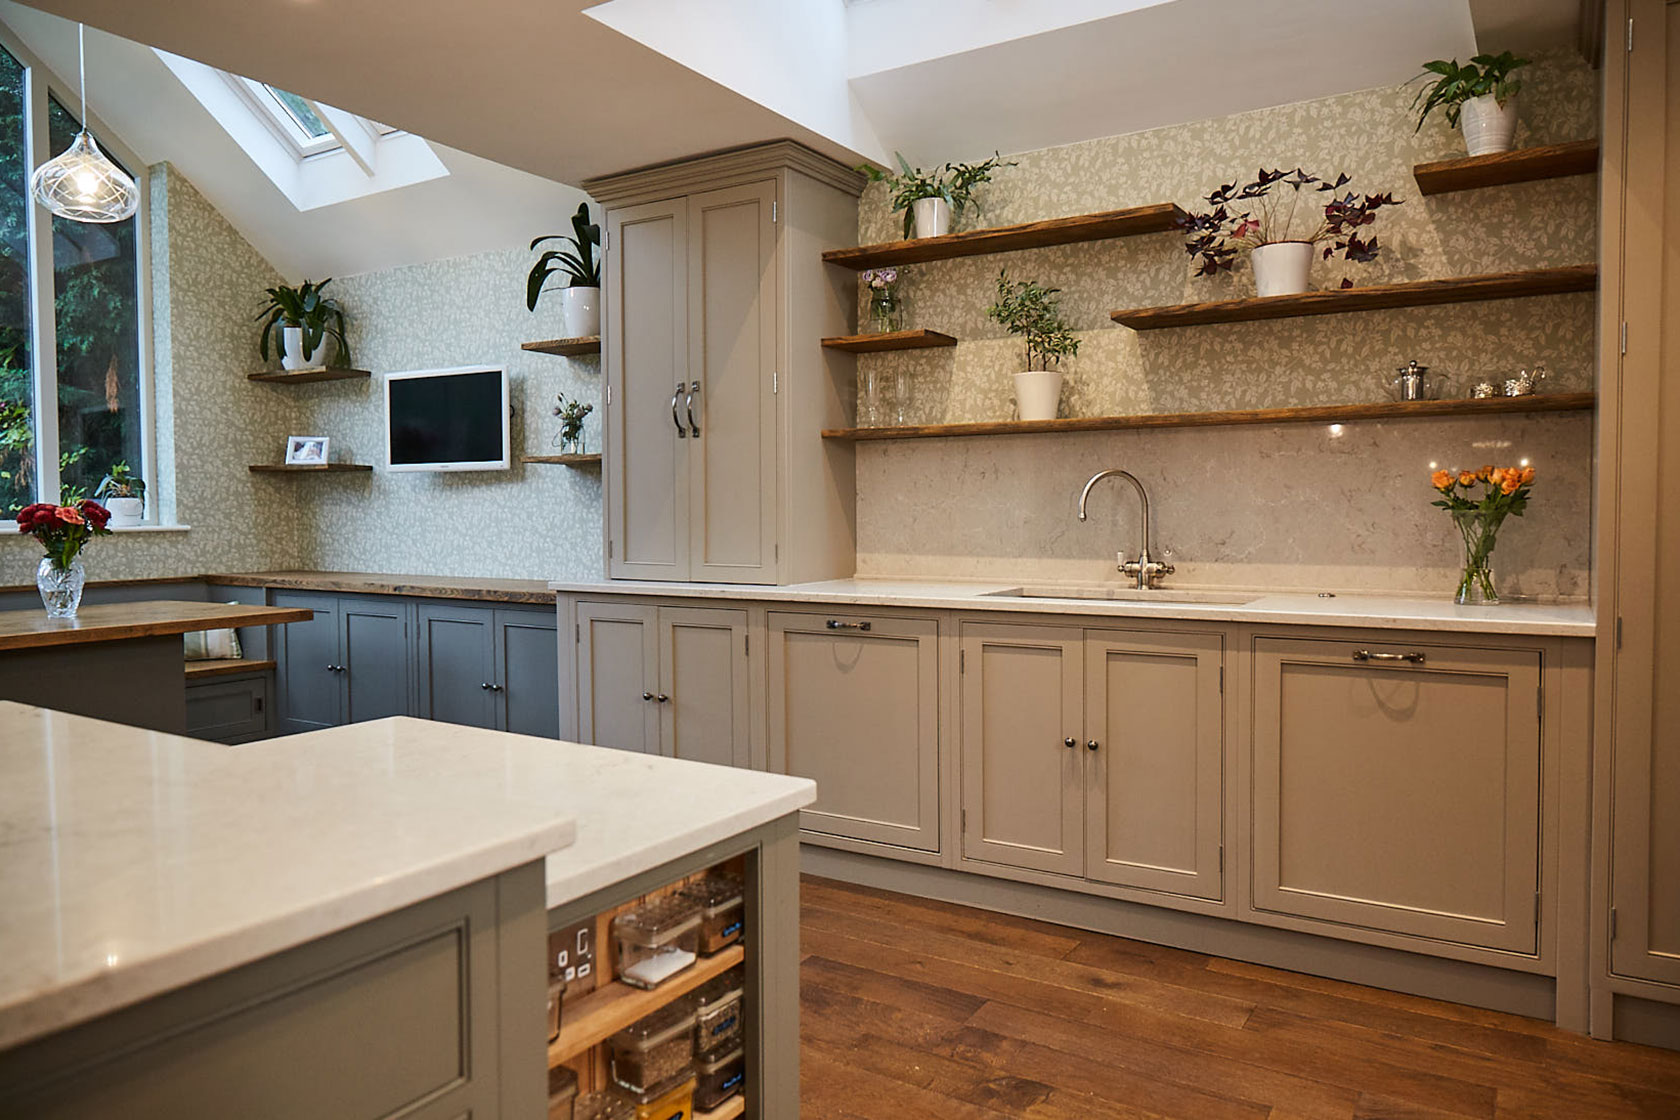 Traditional painted bespoke kitchen sink run with oak flooring